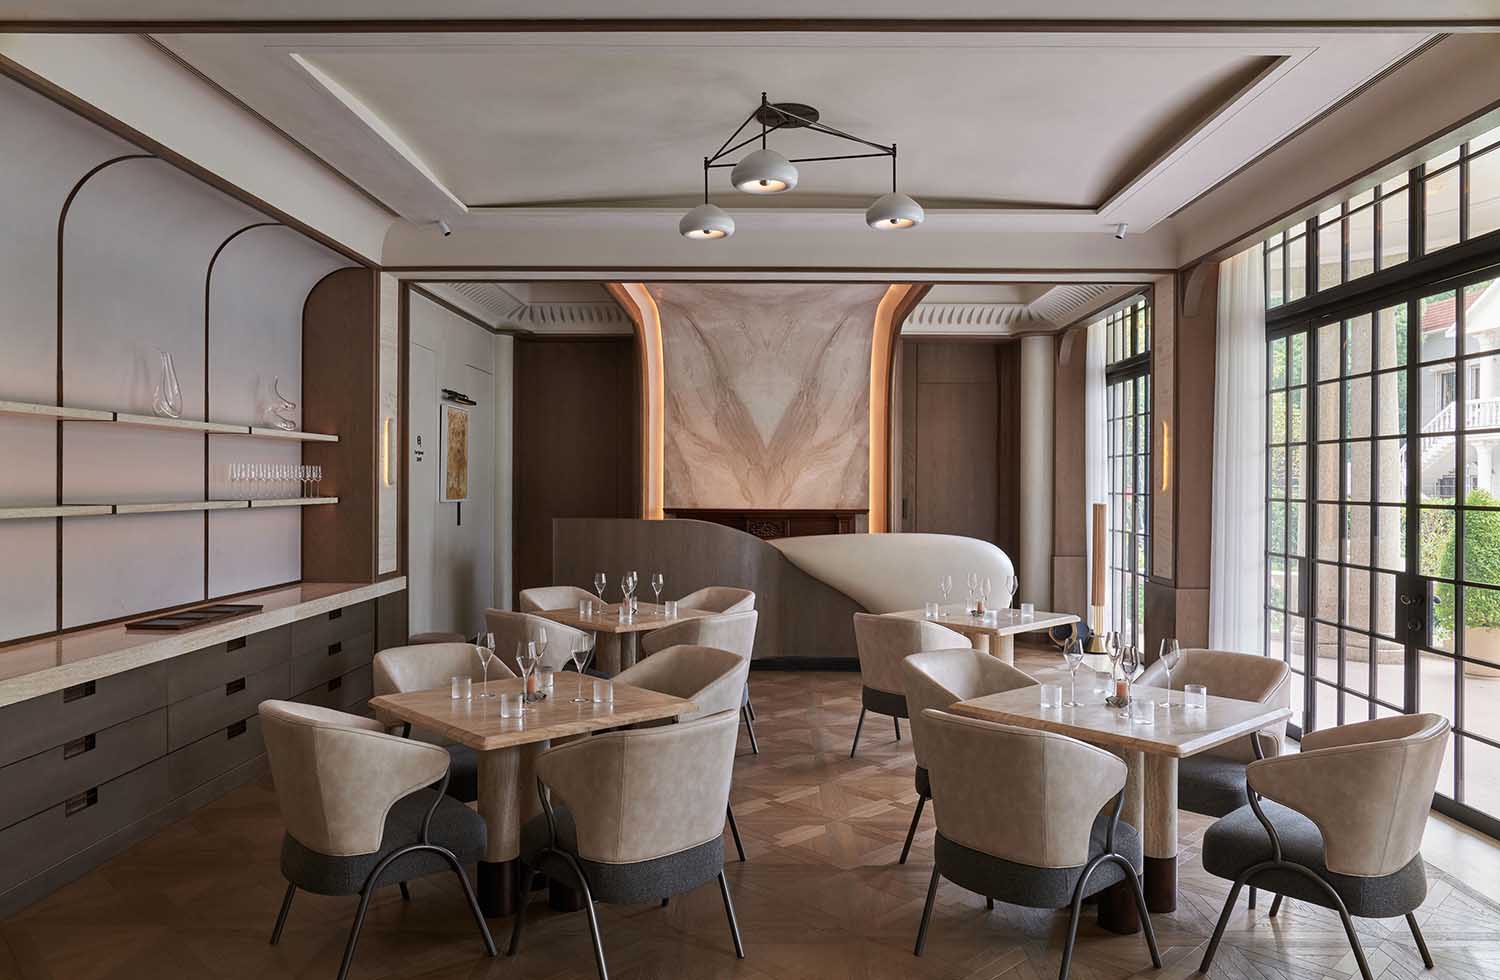 Louis Vuitton Opens The Hall, First Restaurant in China – WWD